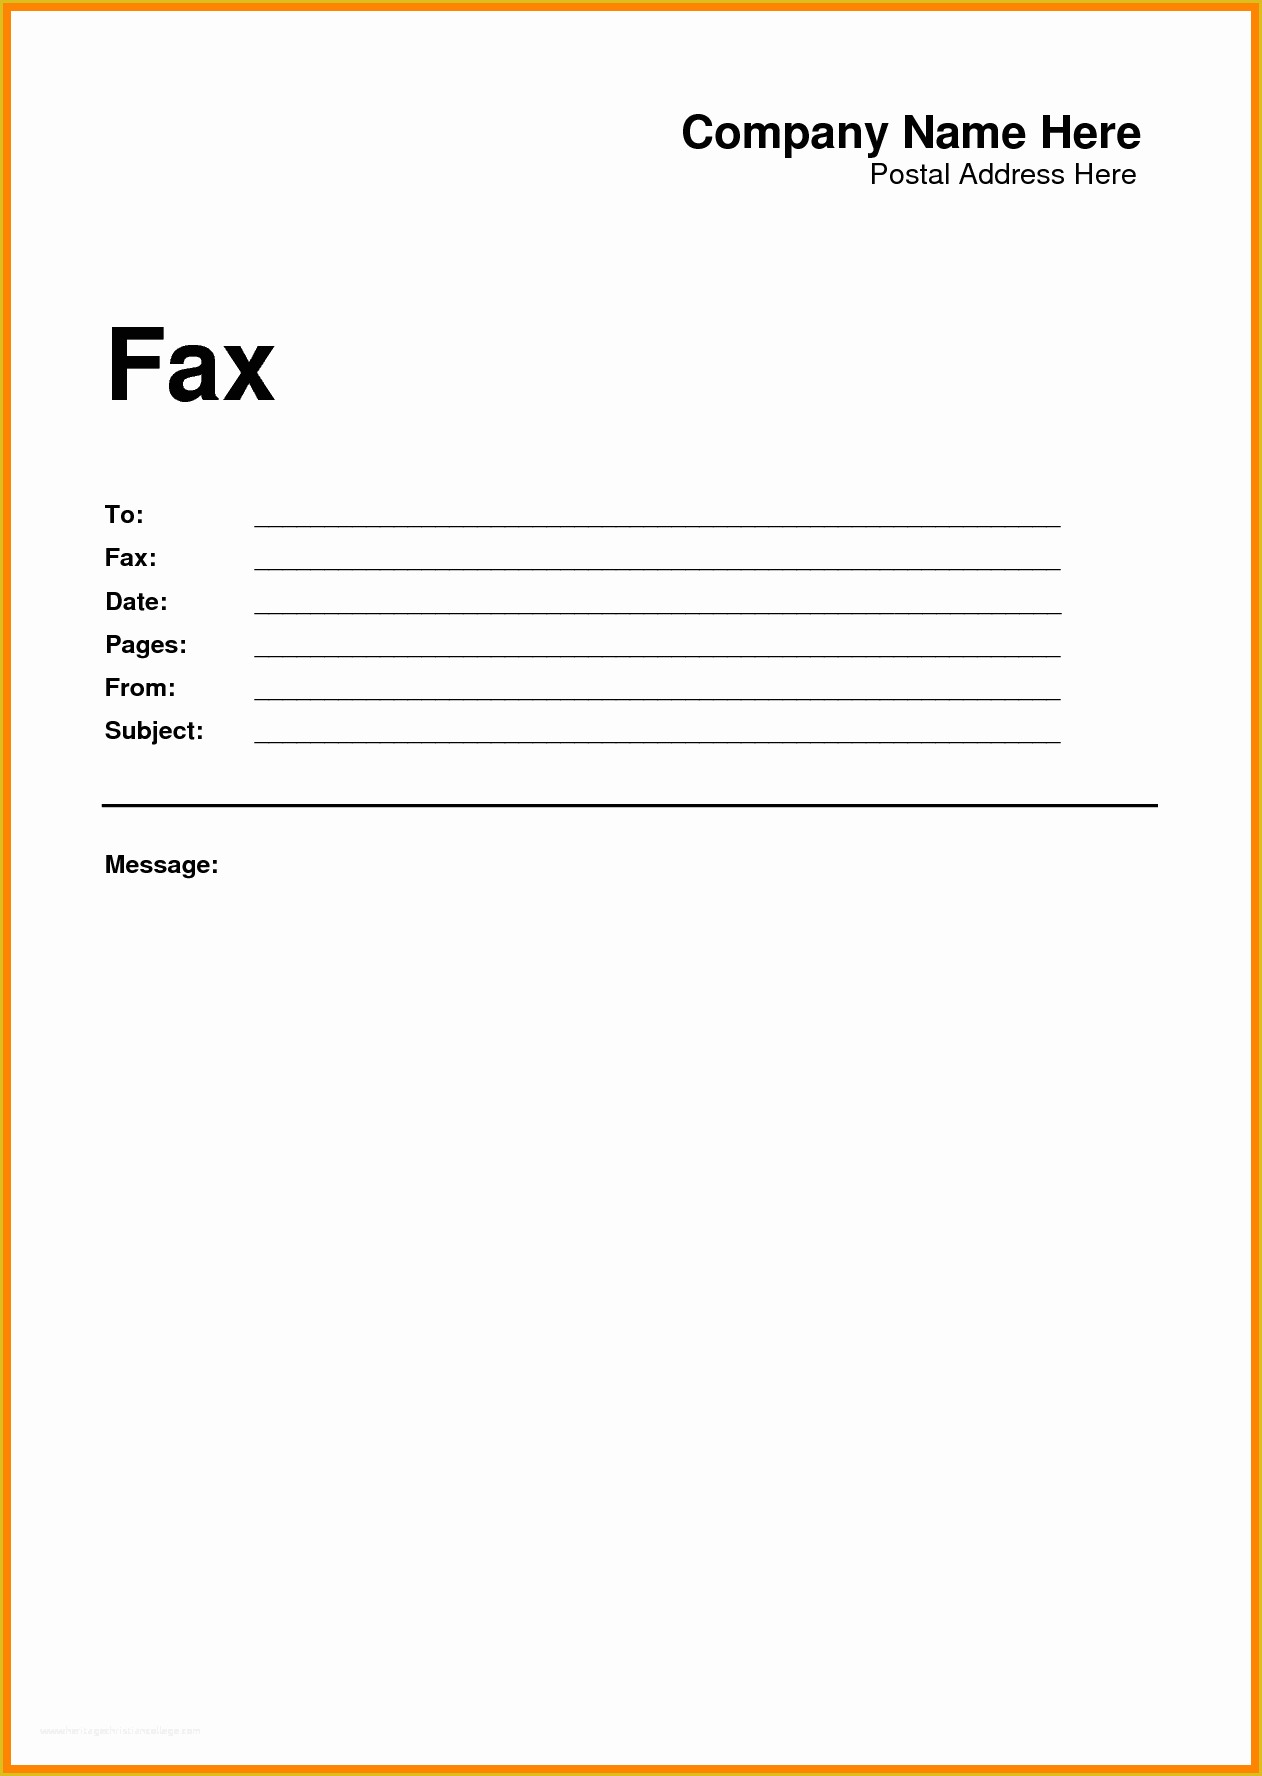 Fax Cover Sheet Template Free Of 6 Free Fax Cover Sheet